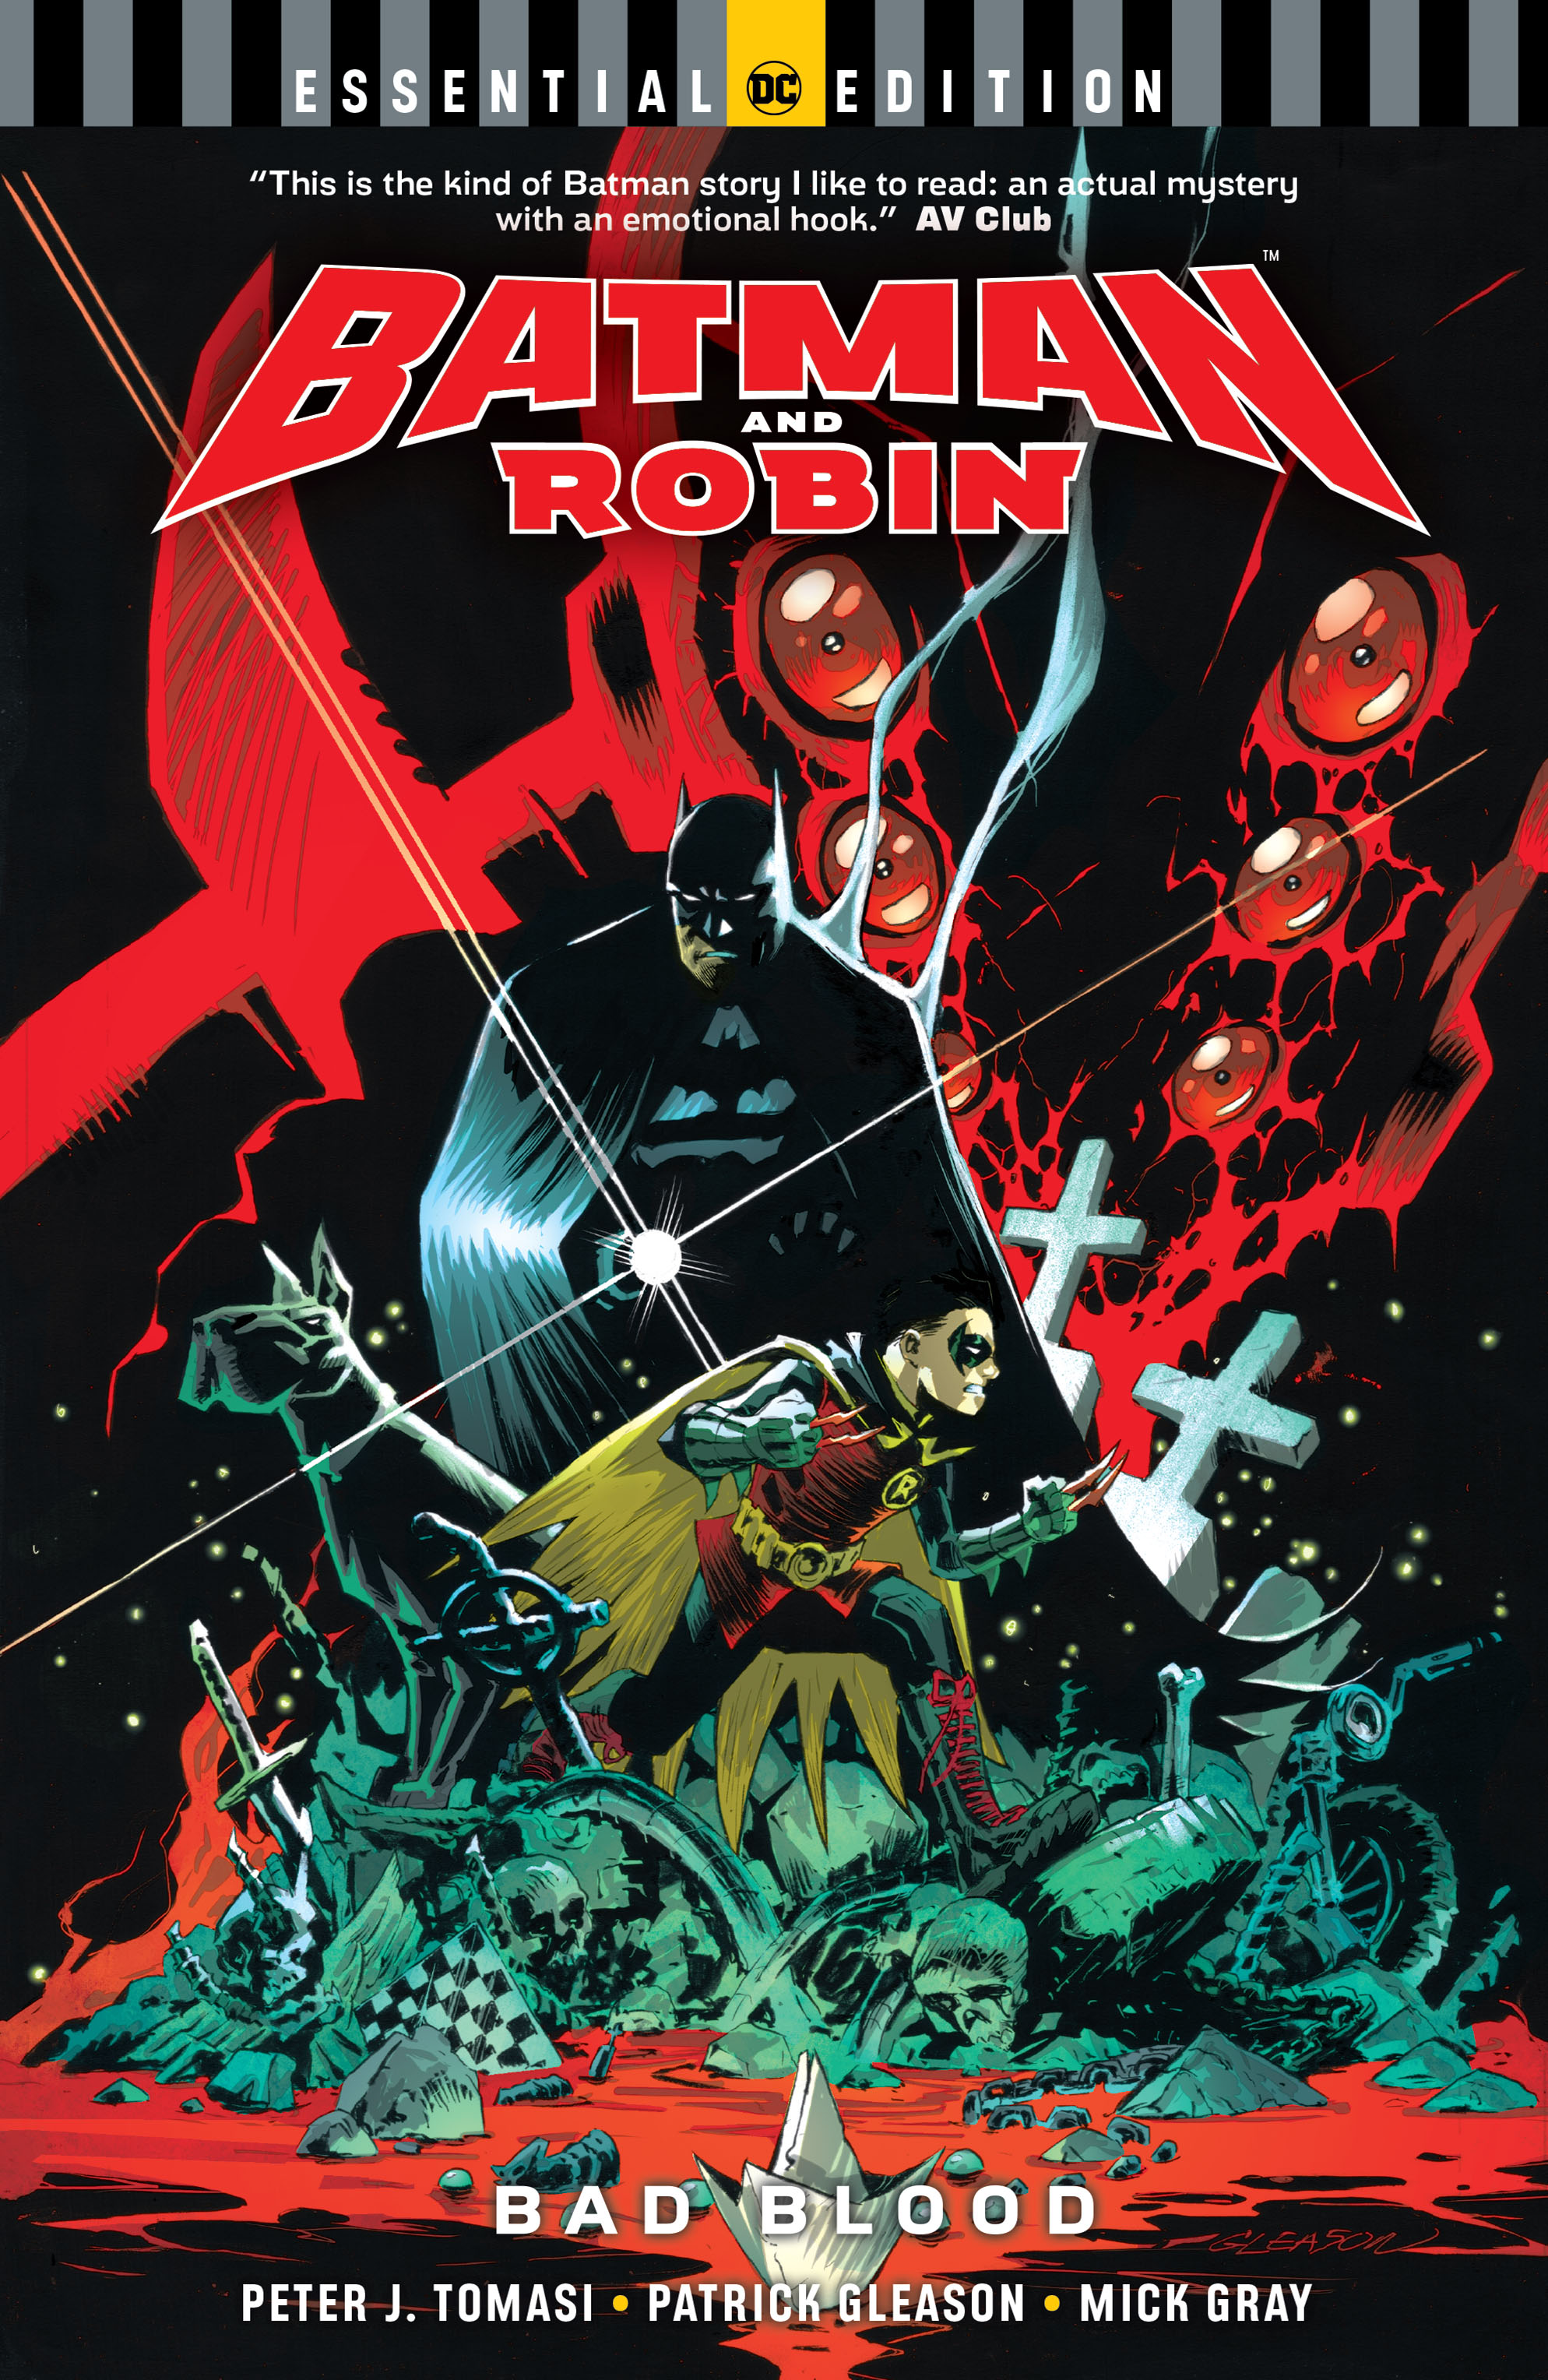 Batman And Robin 2011 Bad Blood Dc Essential Edition Part 1 | Read Batman  And Robin 2011 Bad Blood Dc Essential Edition Part 1 comic online in high  quality. Read Full Comic